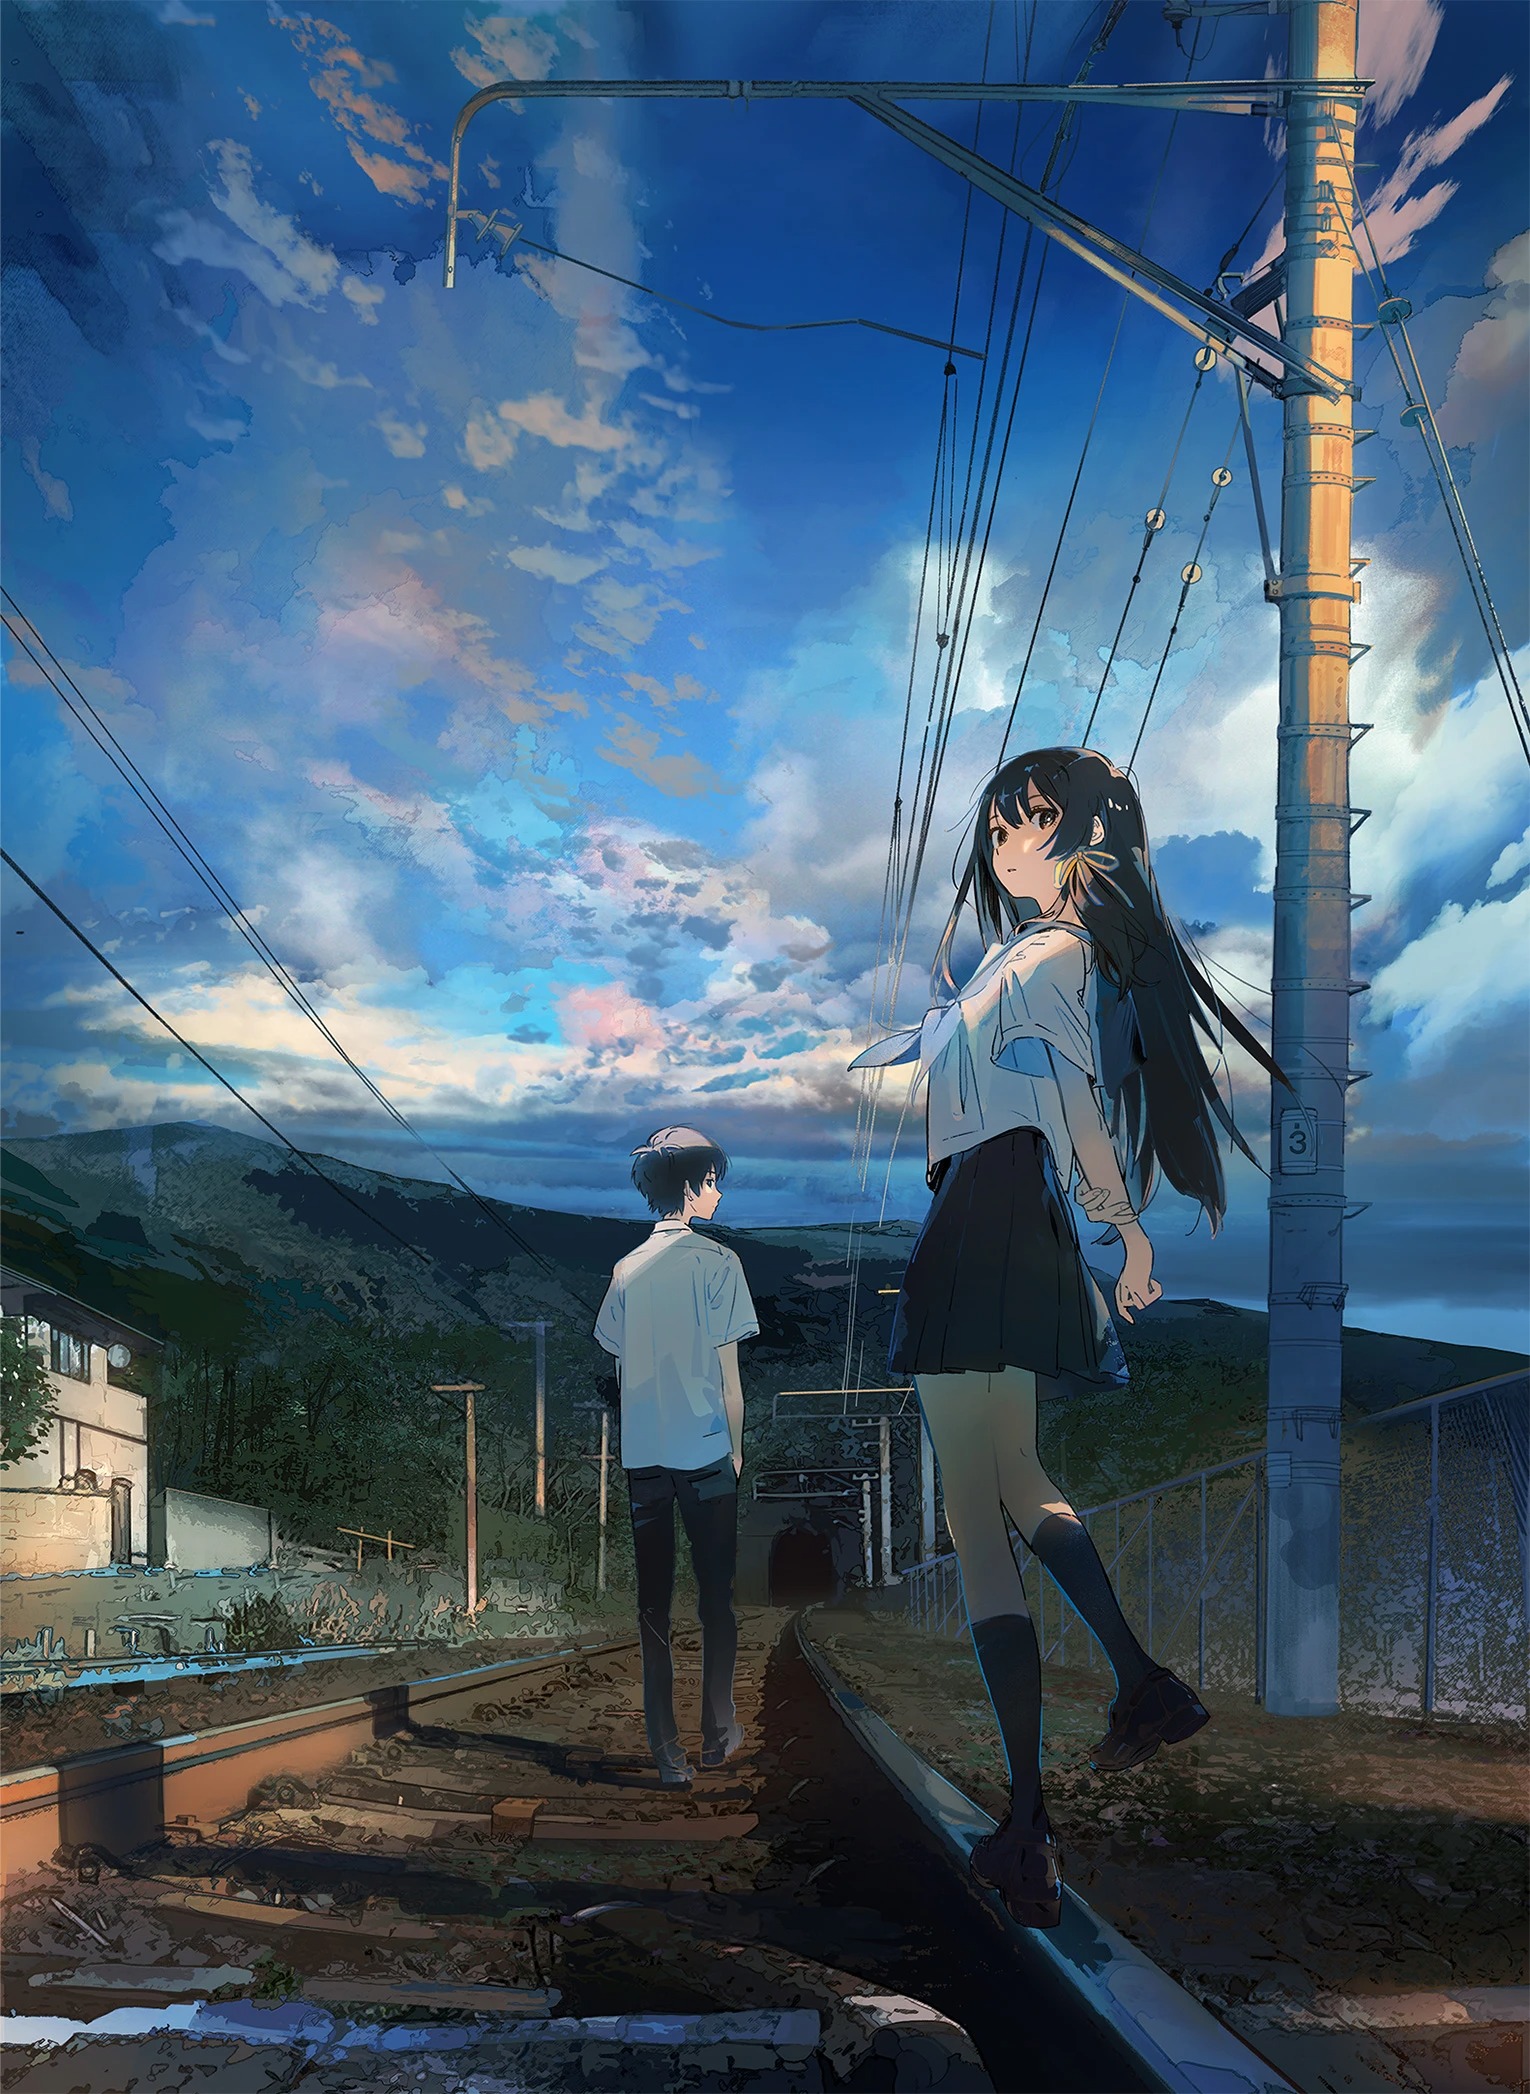 The Tunnel to Summer, the Exit of Goodbyes anime film teaser visual